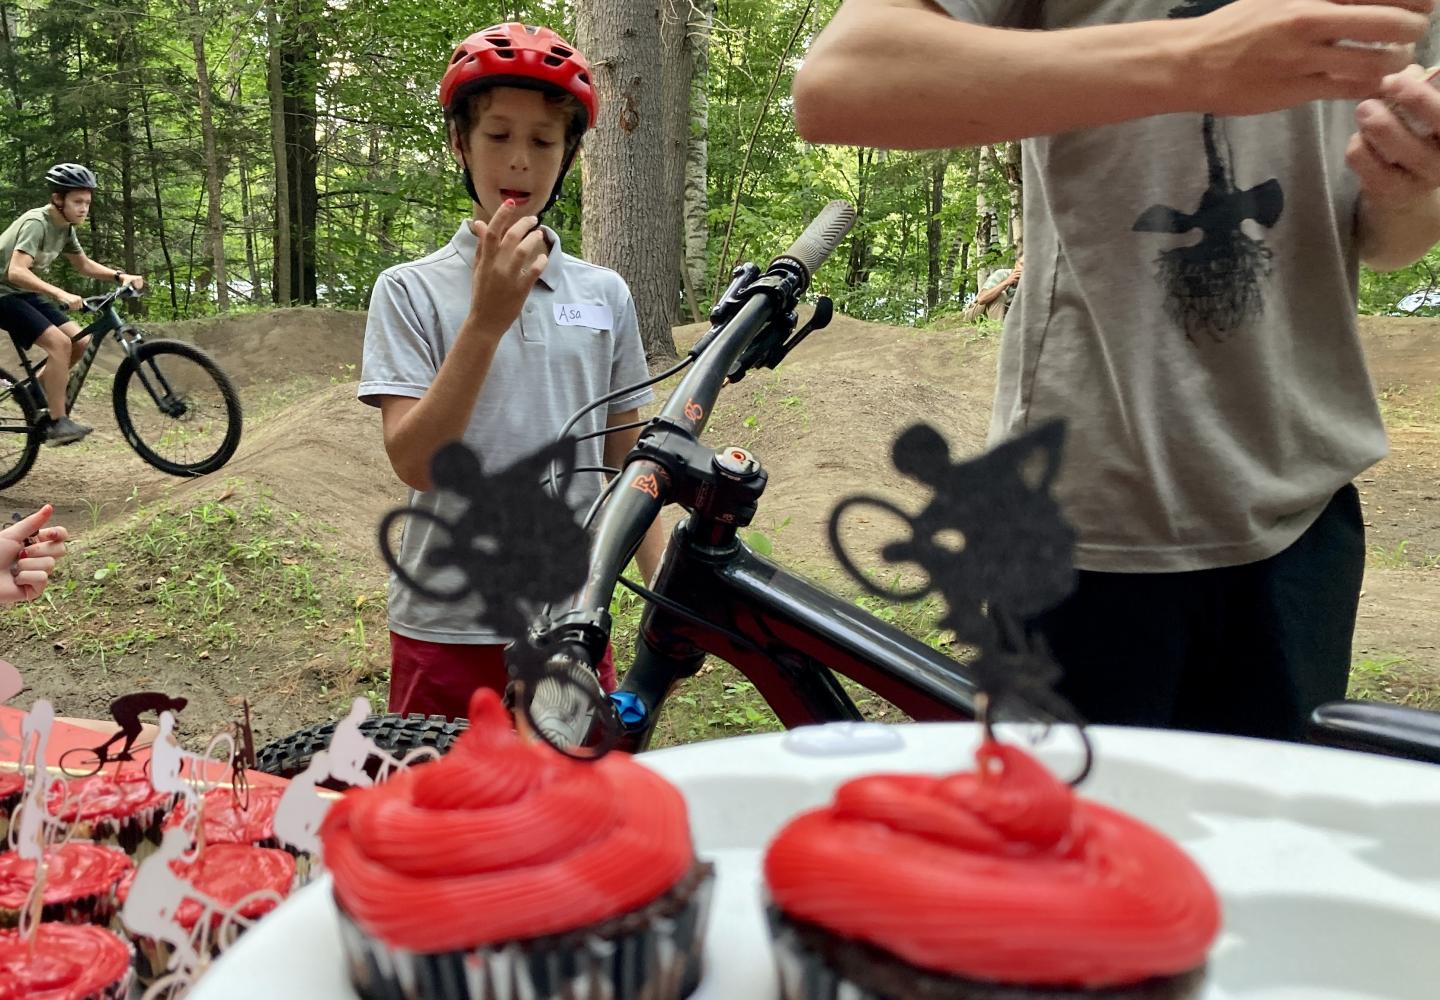 Local kids enjoy cupcakes at the opening of the new Town of Harrietstown Bike Park in Saranac Lake, NY.